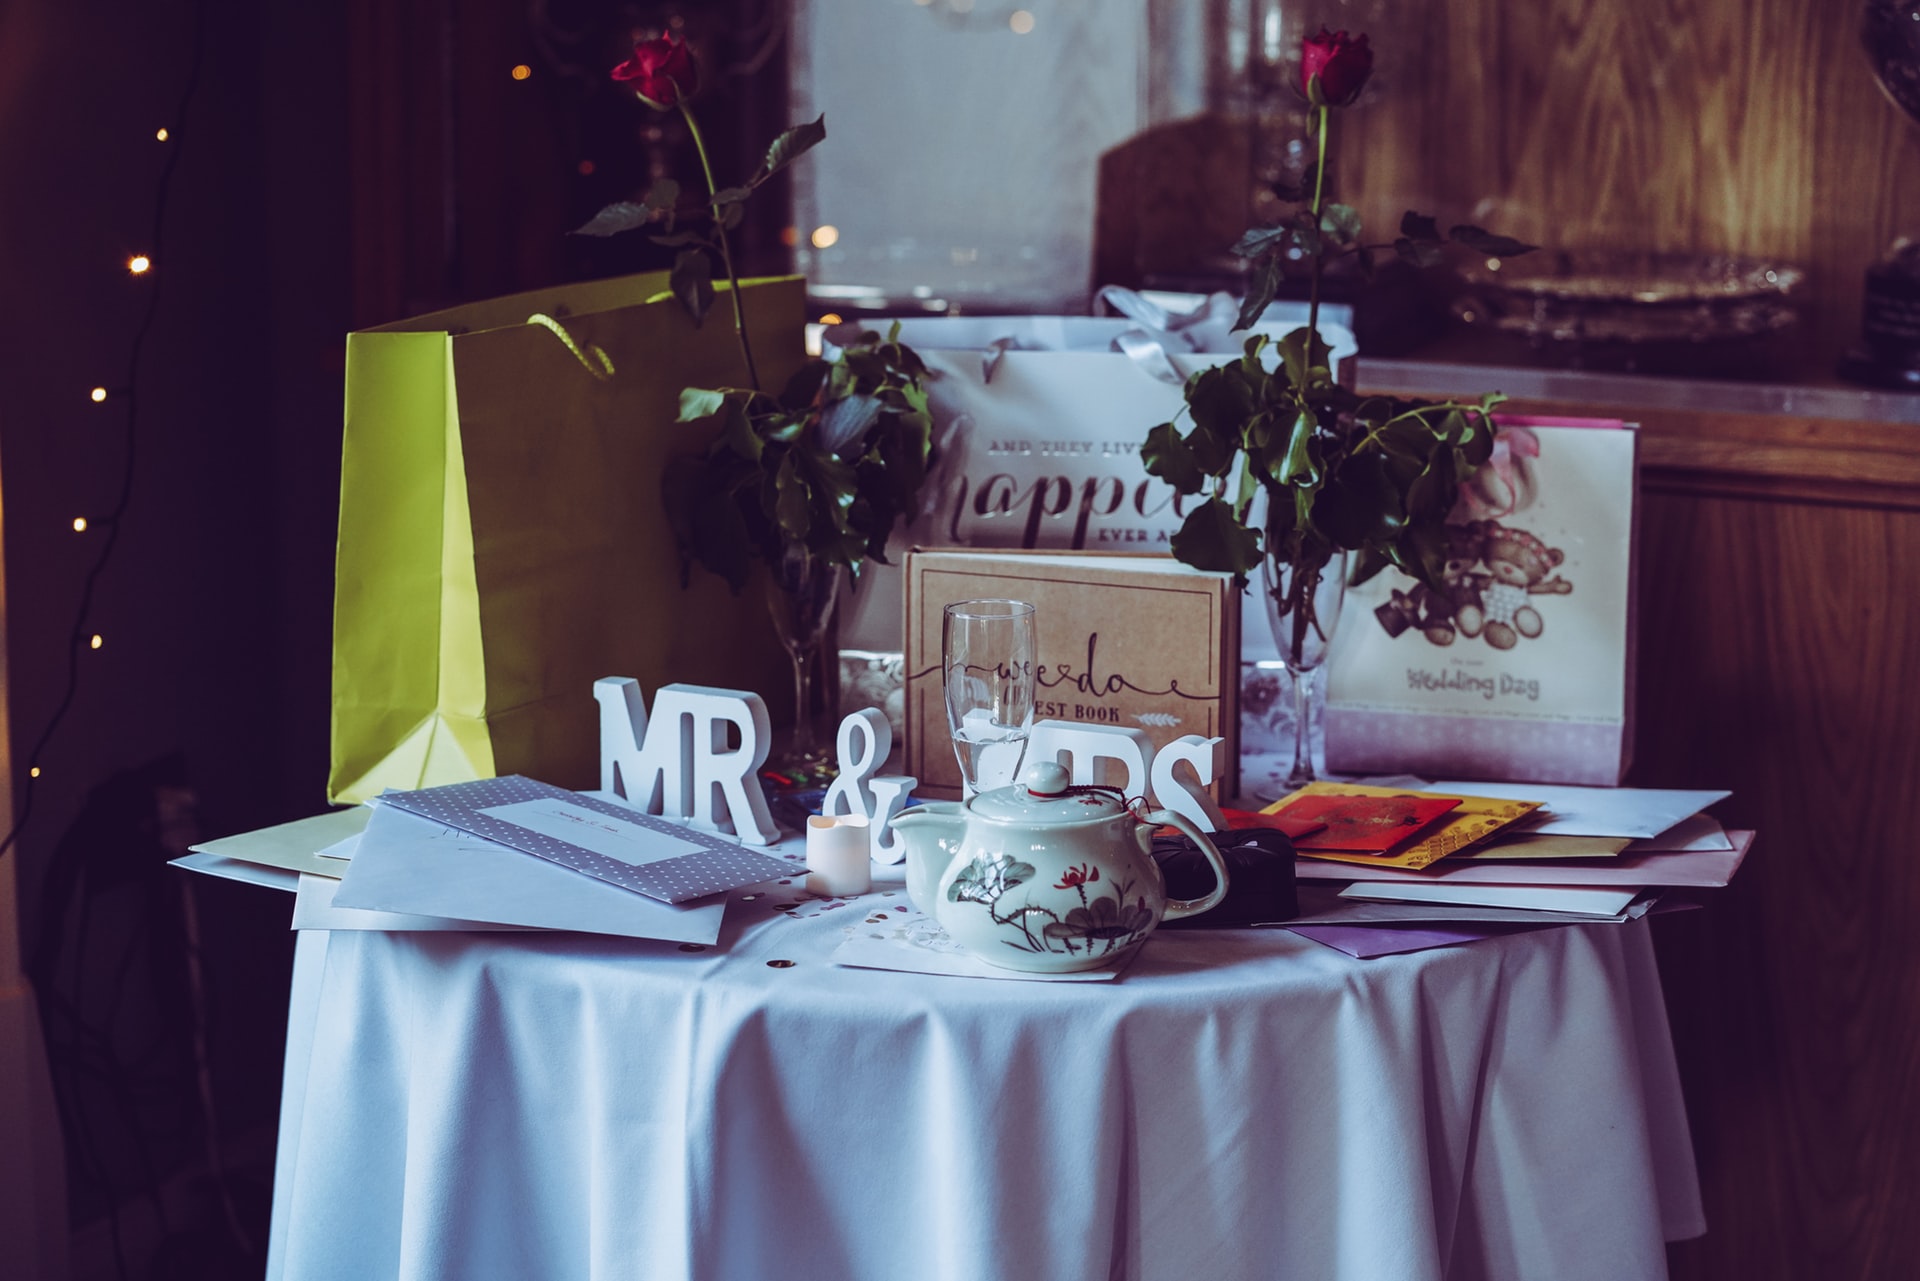 Wedding gifts with two red roses and mr. & mrs. free-standing letters on top of table